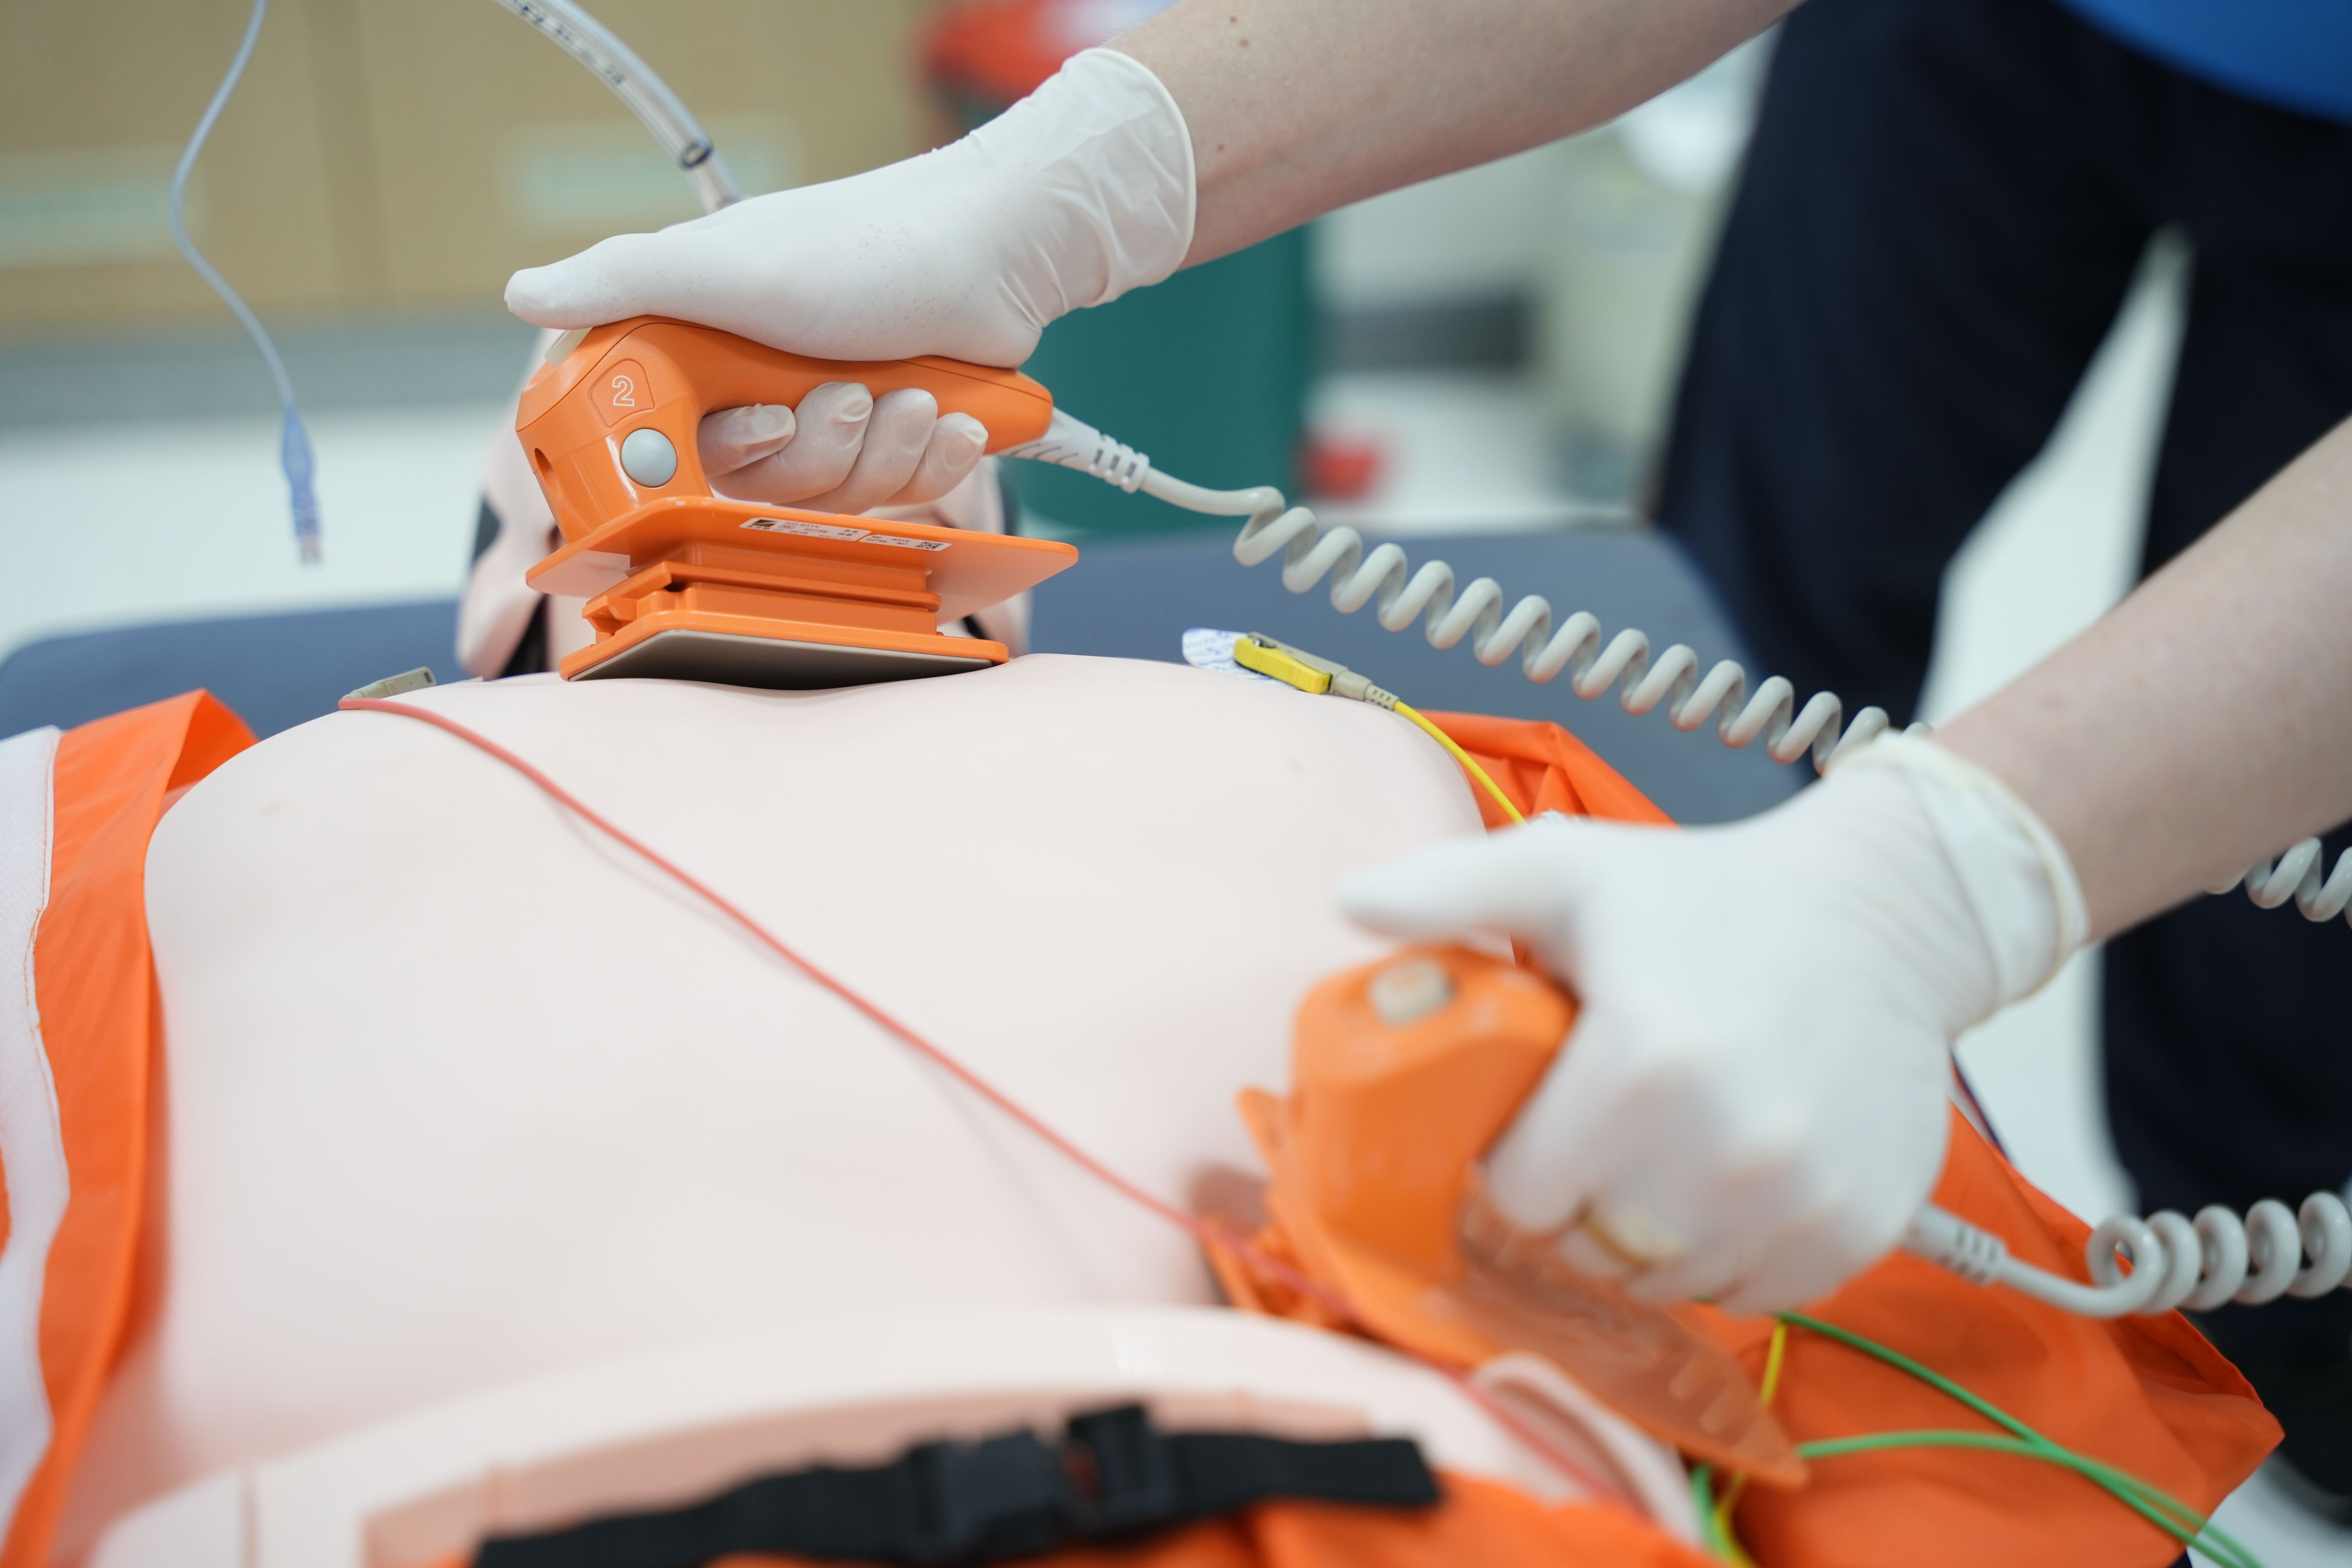 CPR is performed to help patients who are unconscious or cardiac arrest. The CPR procedure consists of checking the safety, waking the patient, evaluating the patient, performing card